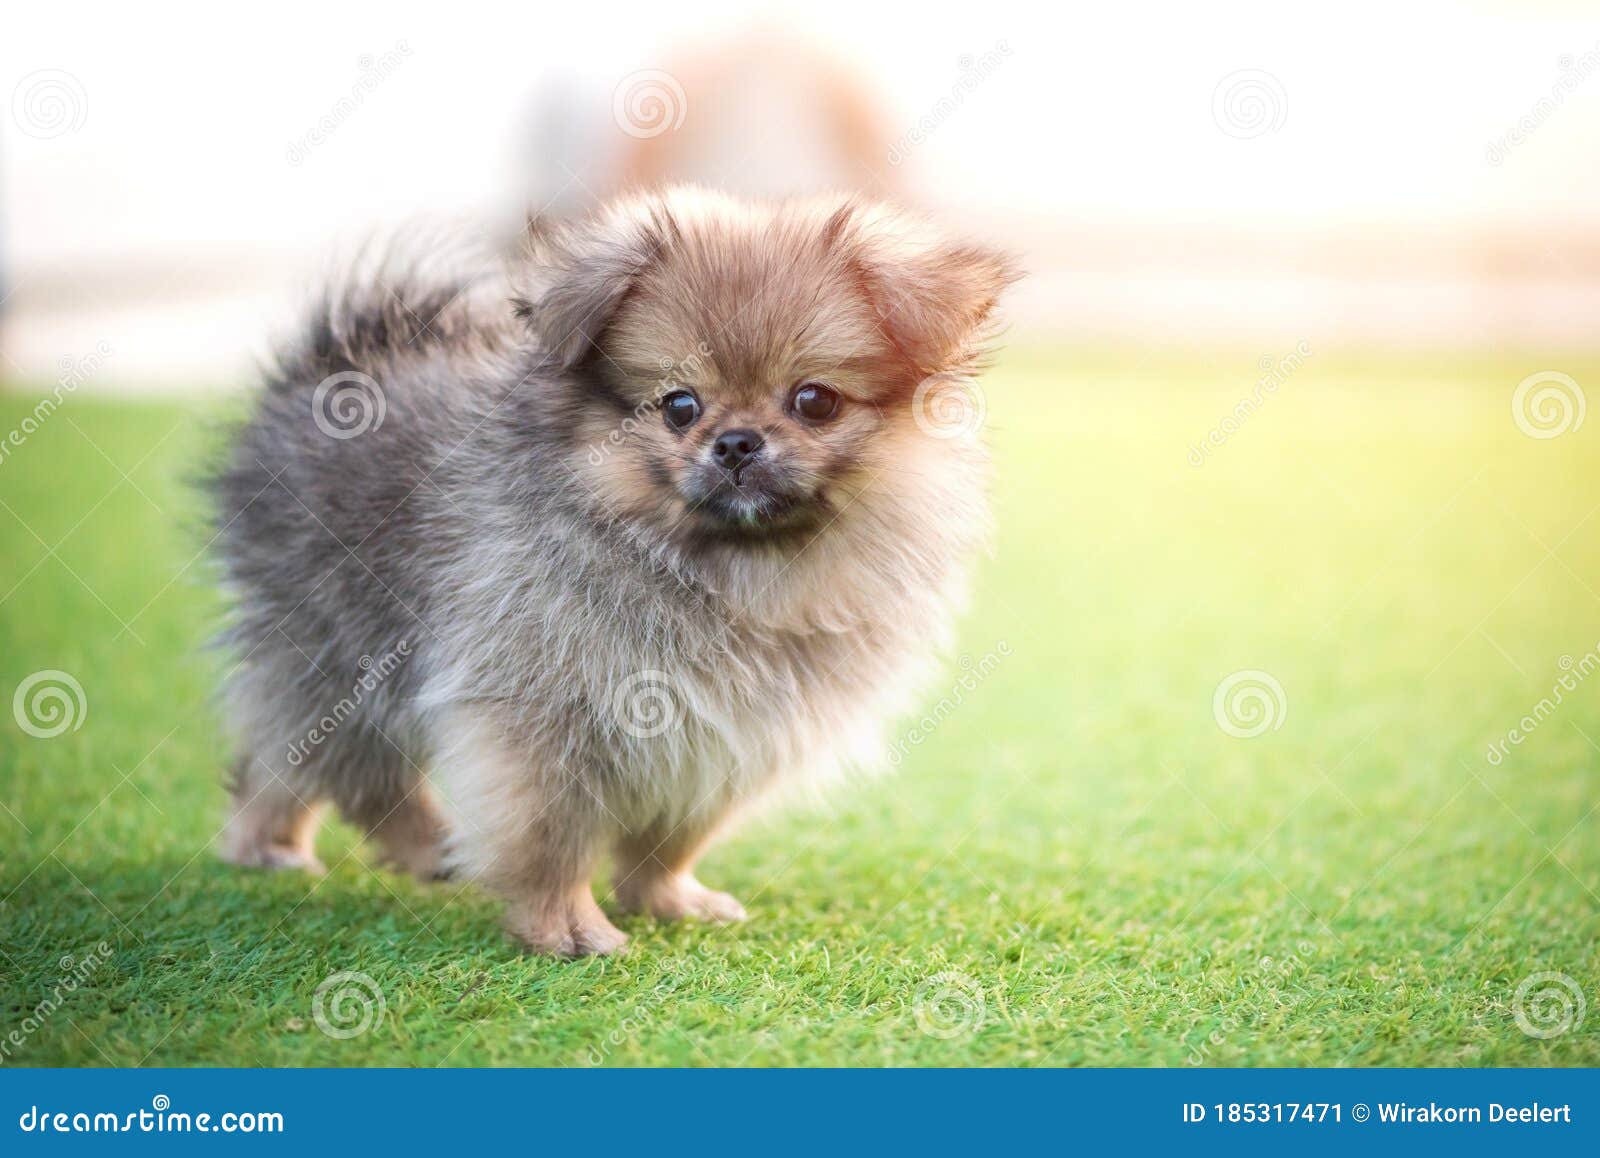 Ja margen Oxide Cute Puppies Pomeranian Mixed Breed Pekingese Dog Standing on the Grass  Stock Image - Image of domestic, hair: 185317471